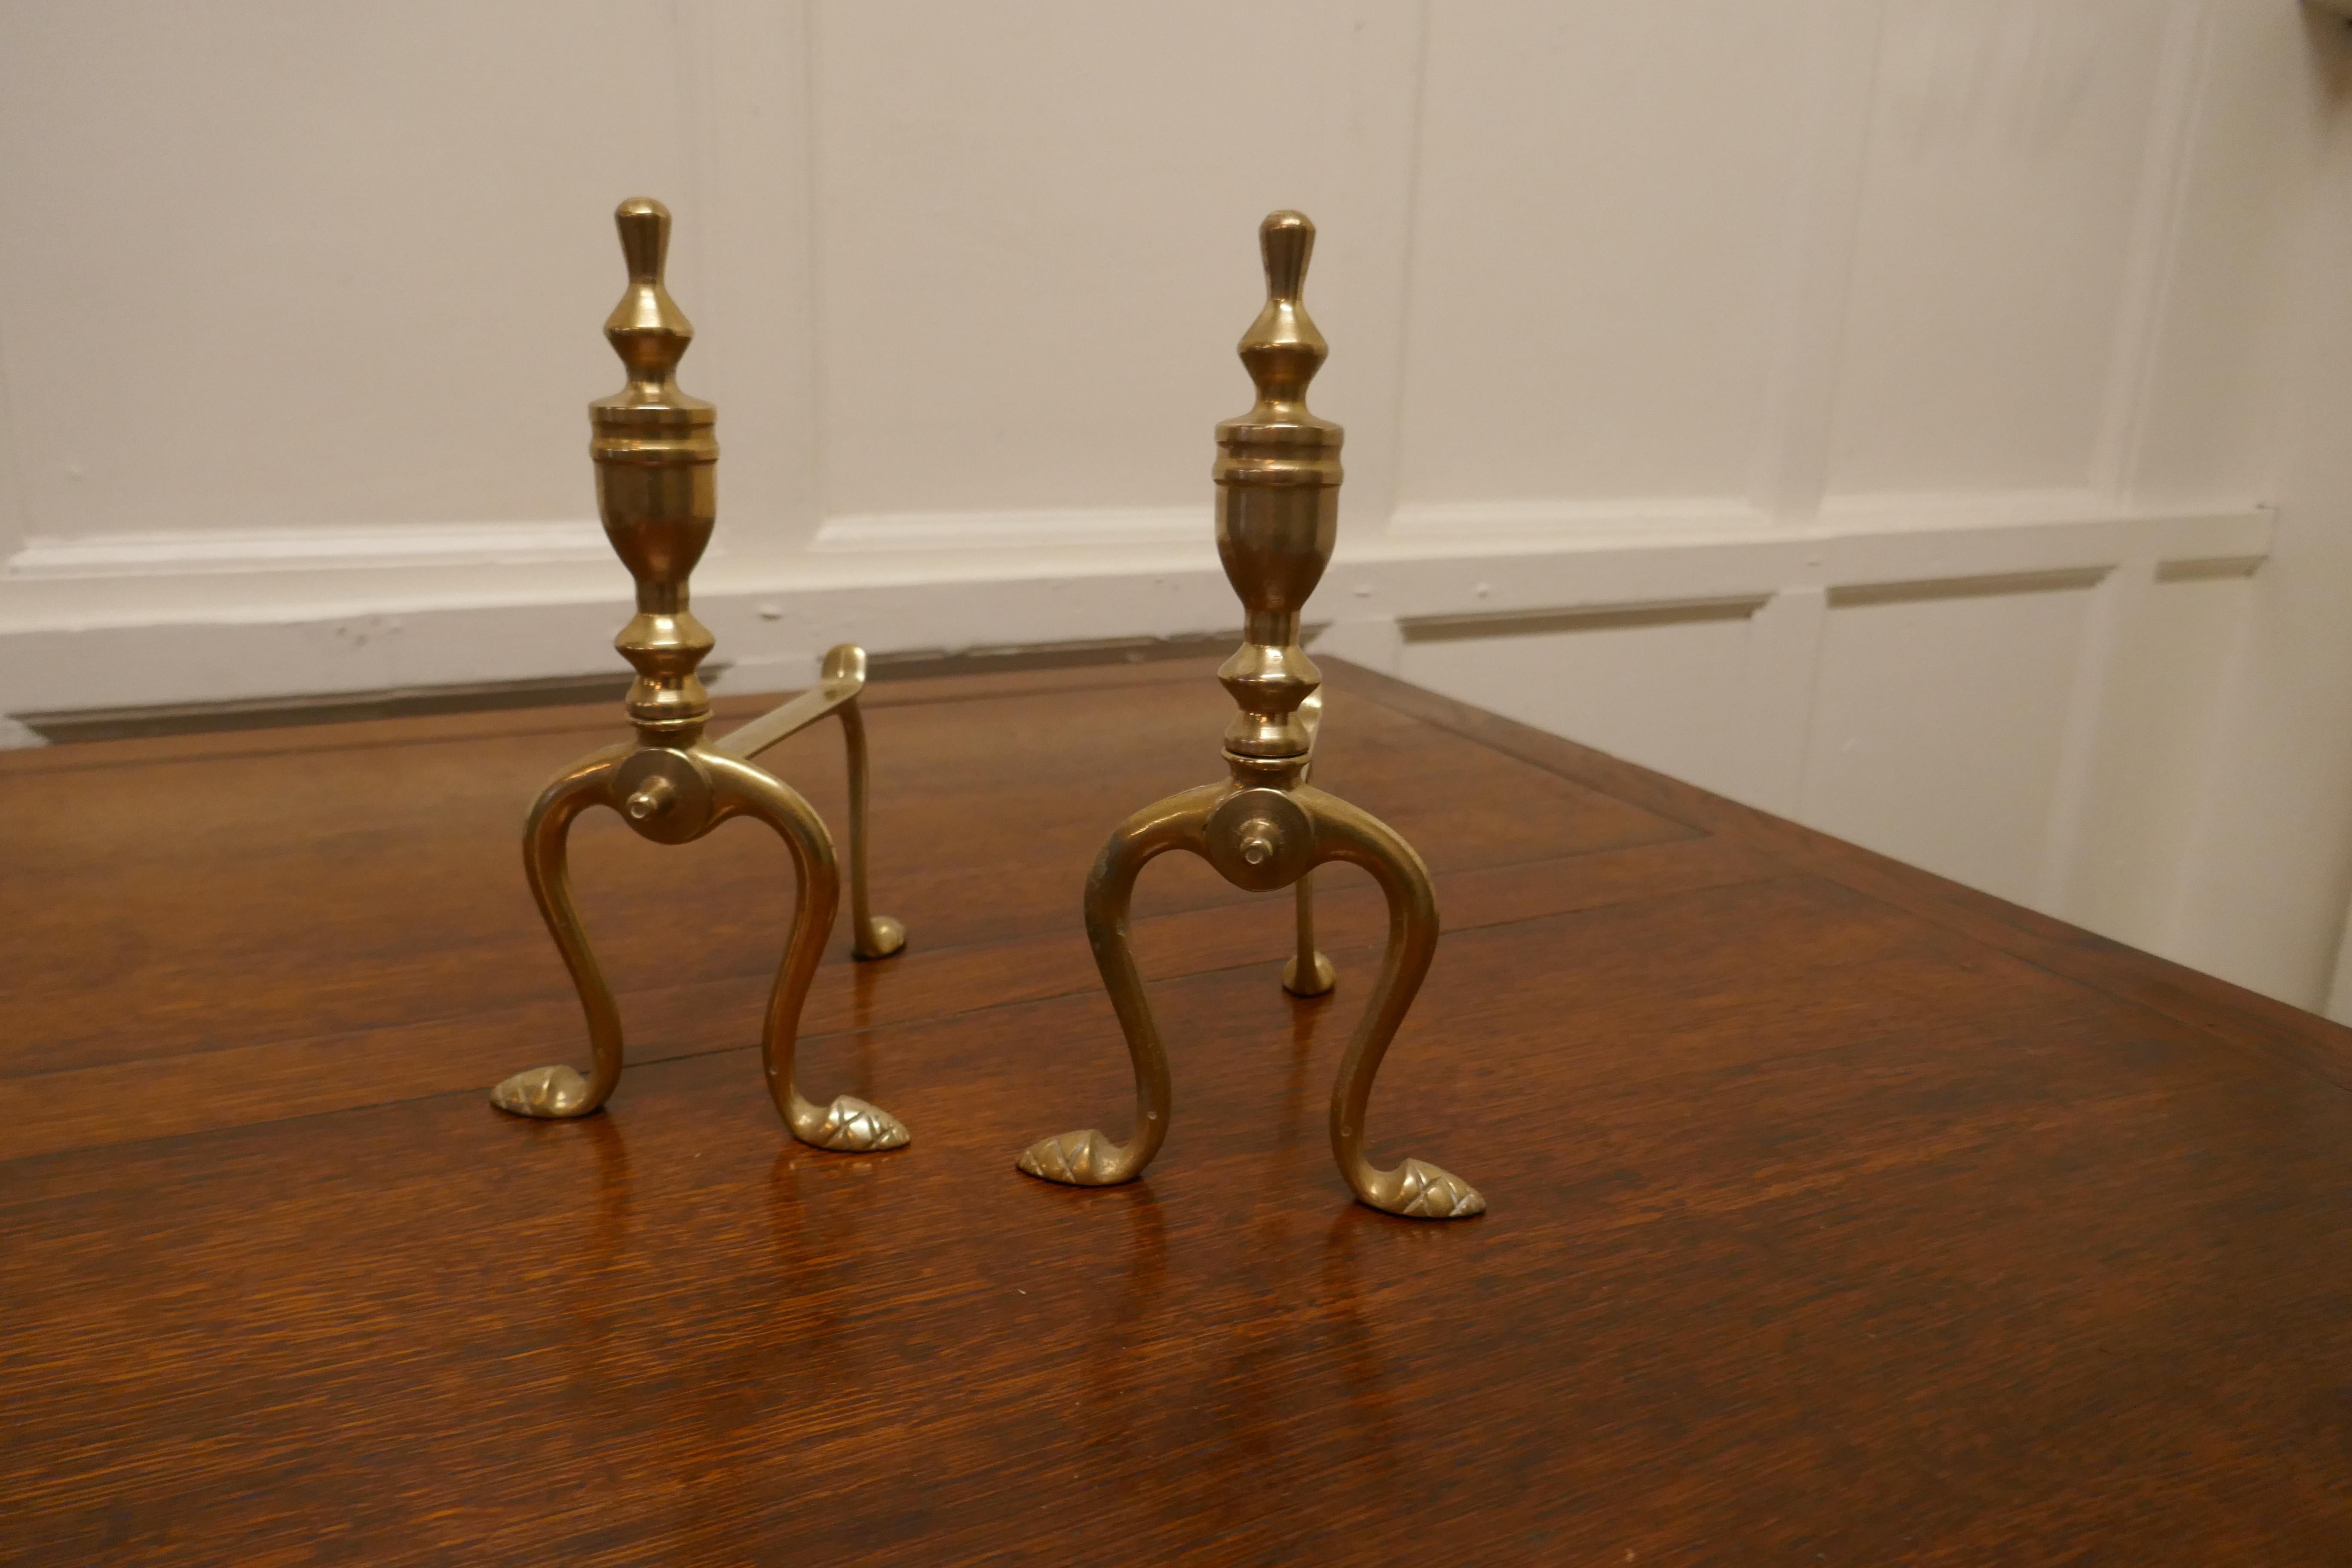 A sturdy pair of Victorian brass andirons or fire dogs


This very attractive pair of brass Andirons is 10” high, 8” long and 6” wide across the front, they are in excellent but obviously used condition, just what you fire tools need to keep them